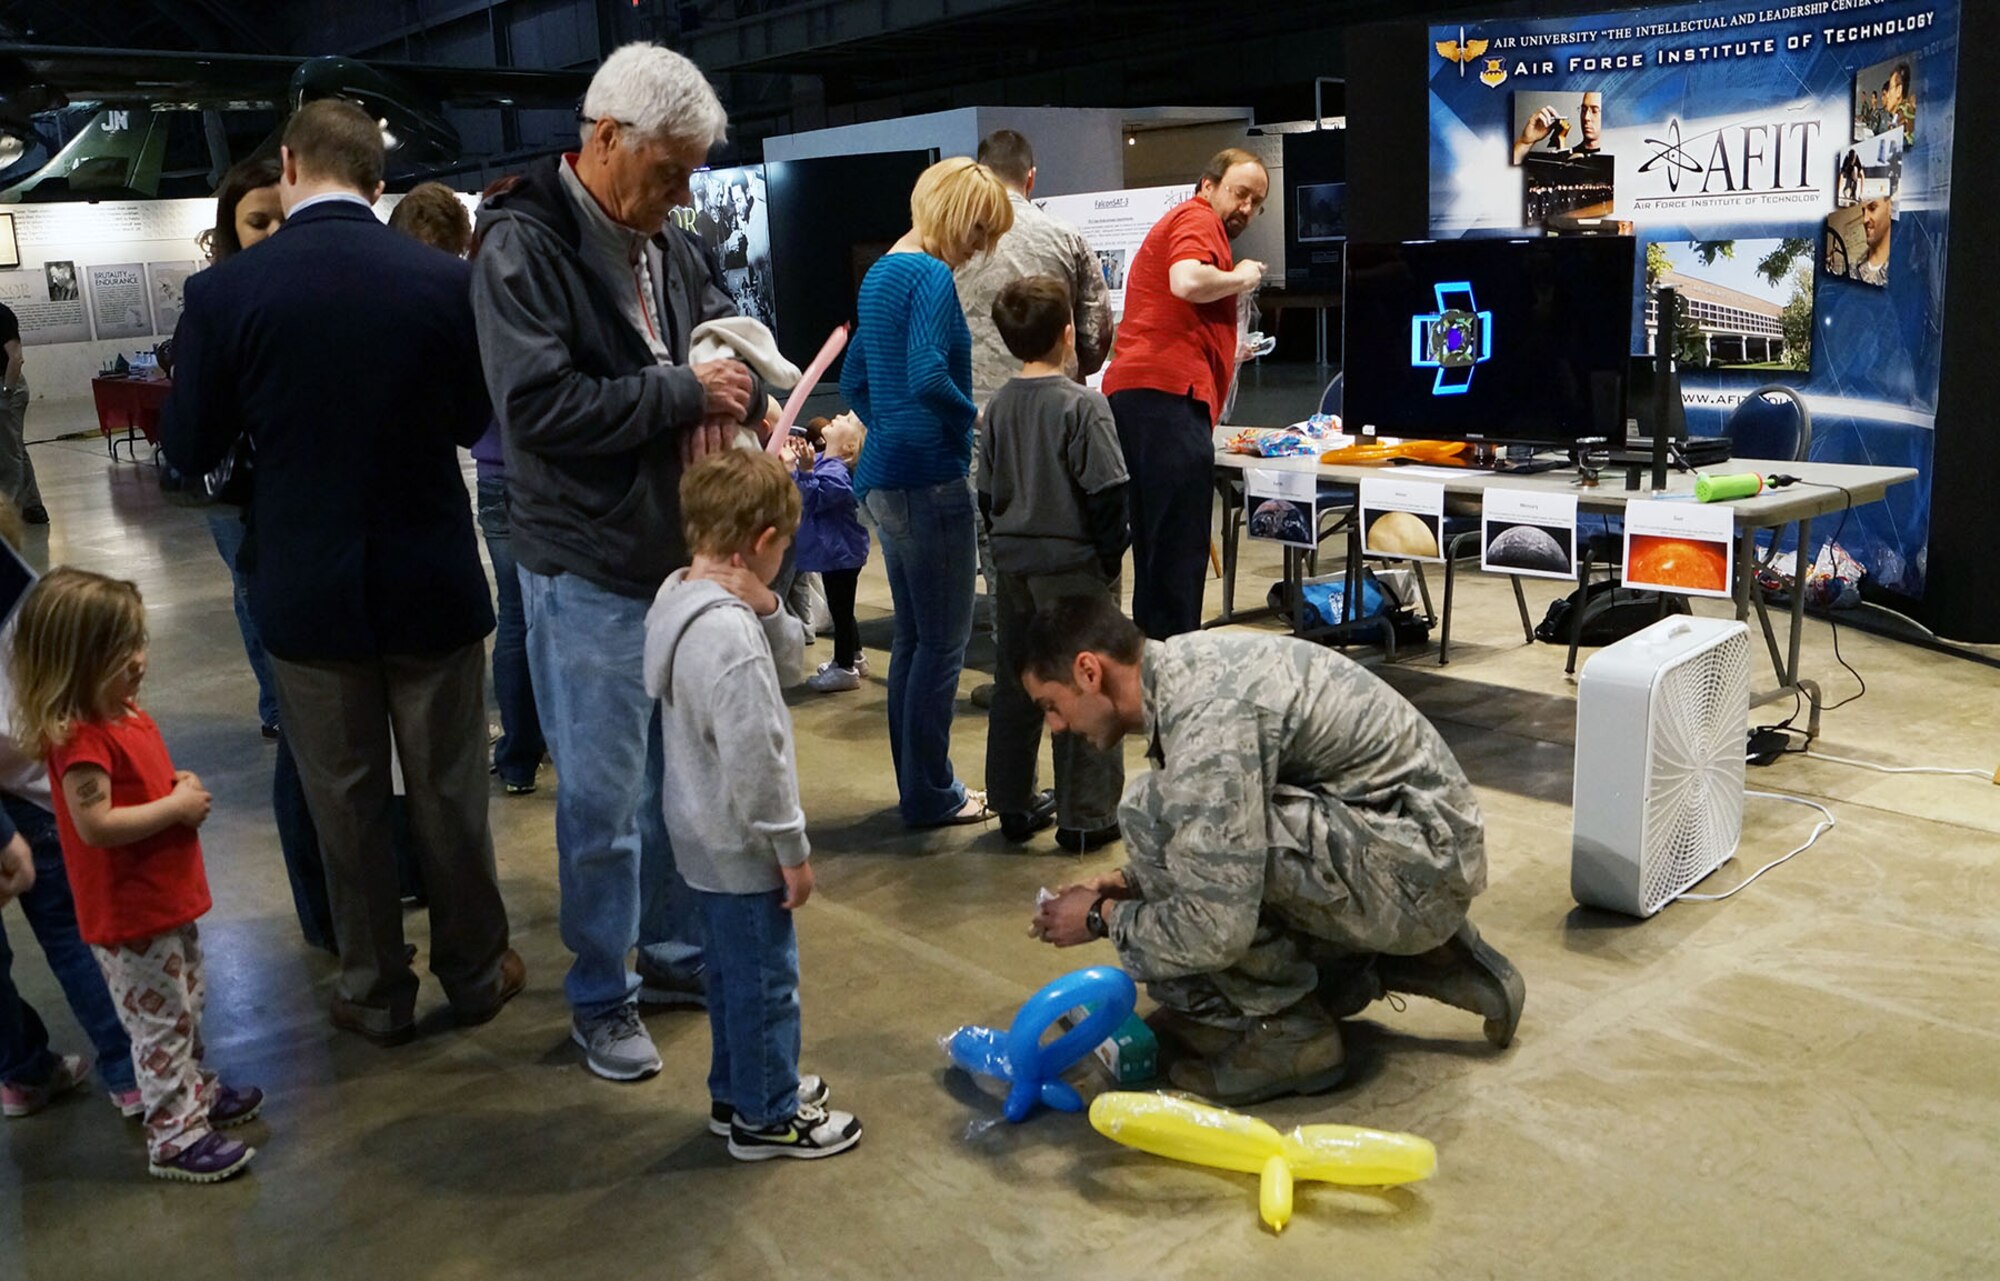 DAYTON, Ohio (05/2013) -- Participants enjoyed a number of hands-on activities during Space Fest on May 4 at the National Museum of the U.S. Air Force. (U.S. Air Force photo by Valerie Kulesza)